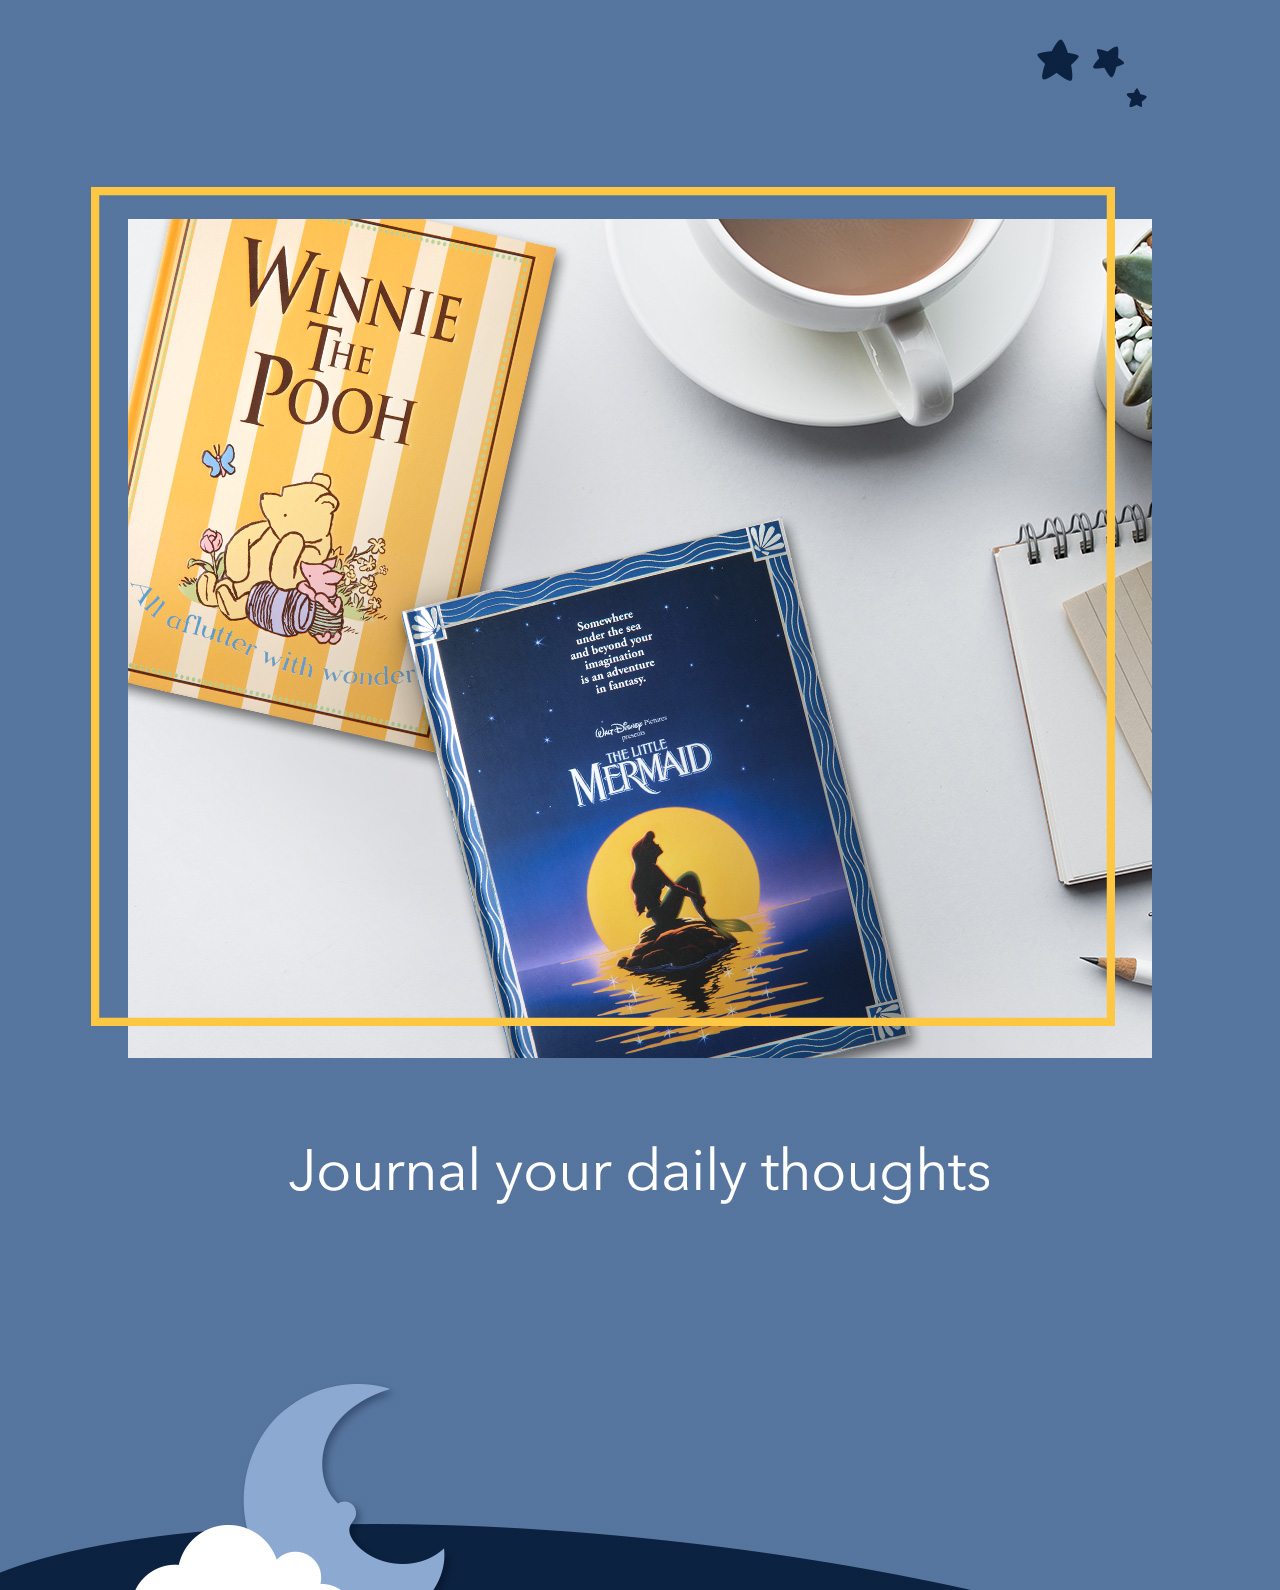 Journal your daily thoughts